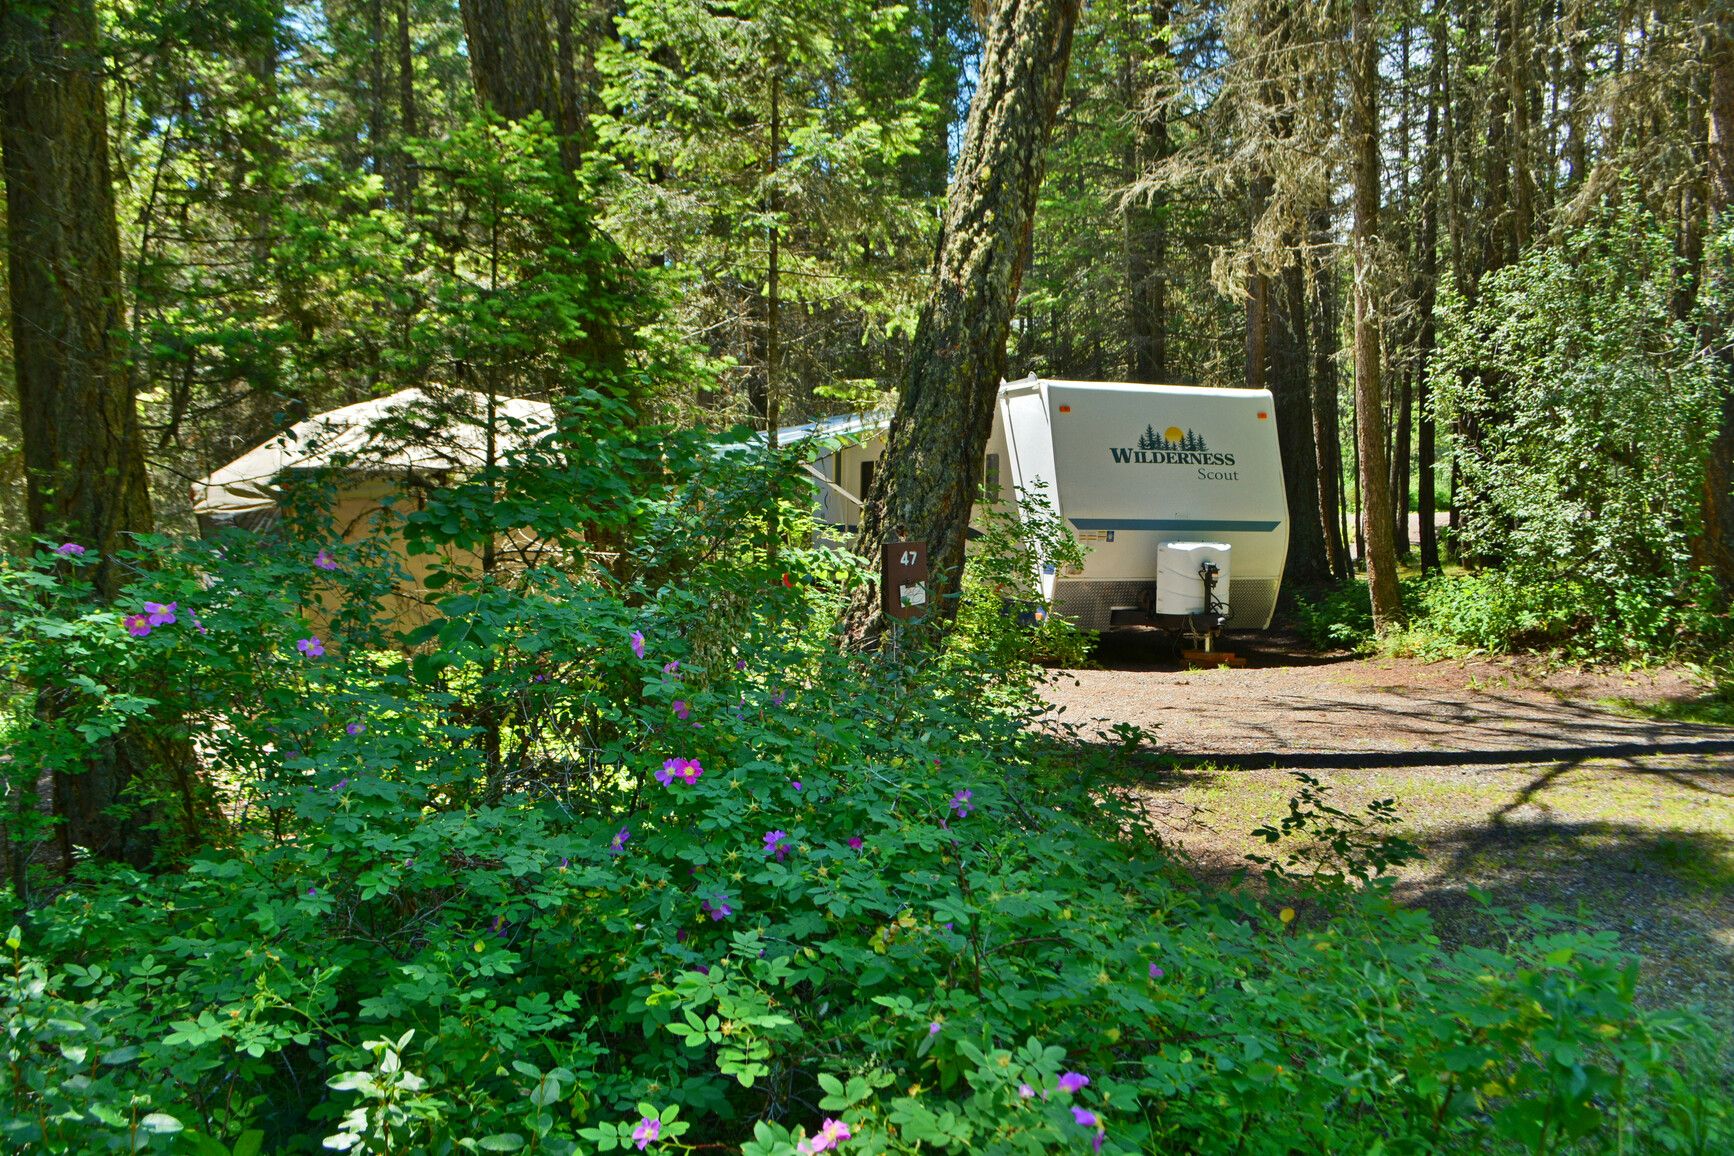 Paul Lake Park offers large sites, perfect for RVs and family fun.